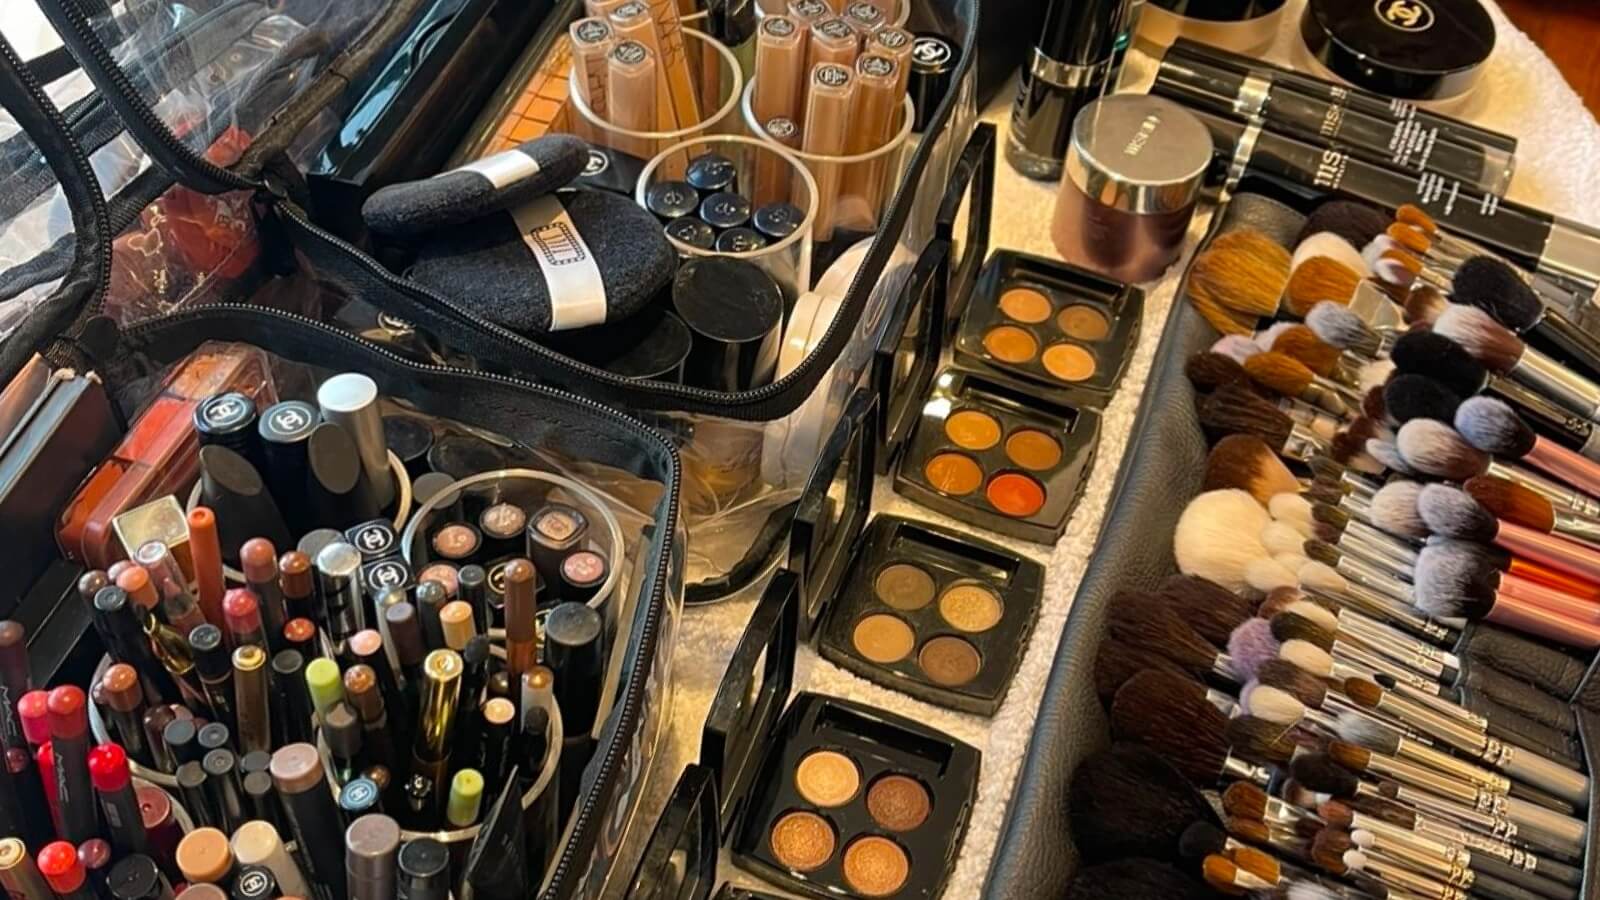 How To Build An MUA Kit According To Makeup Artists - Beauty Bay Edited